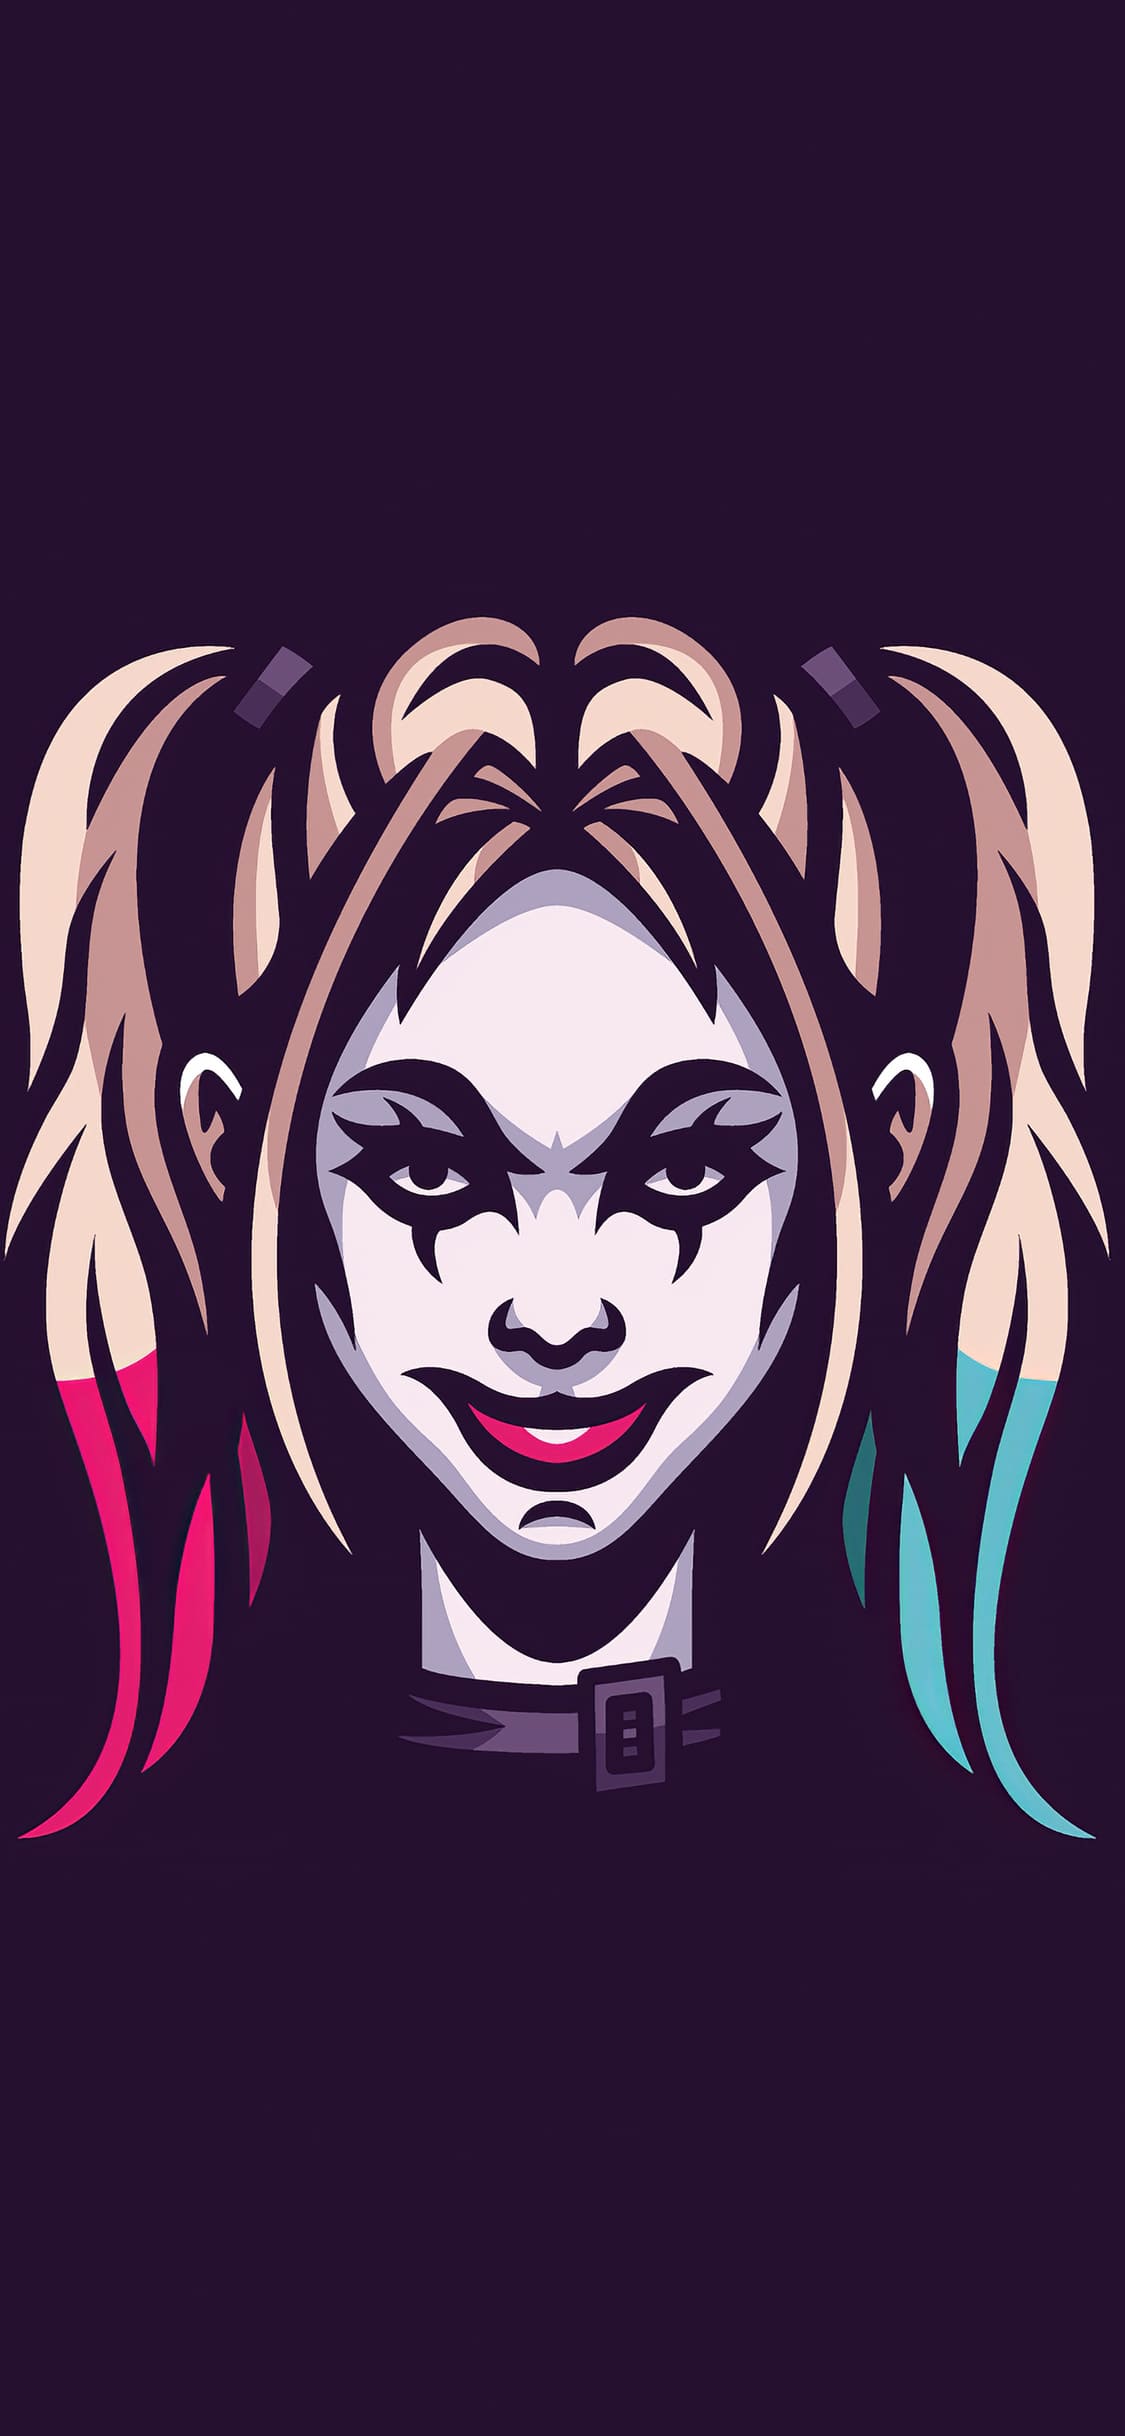 Harley Quinn IPhone Wallpapers 2020